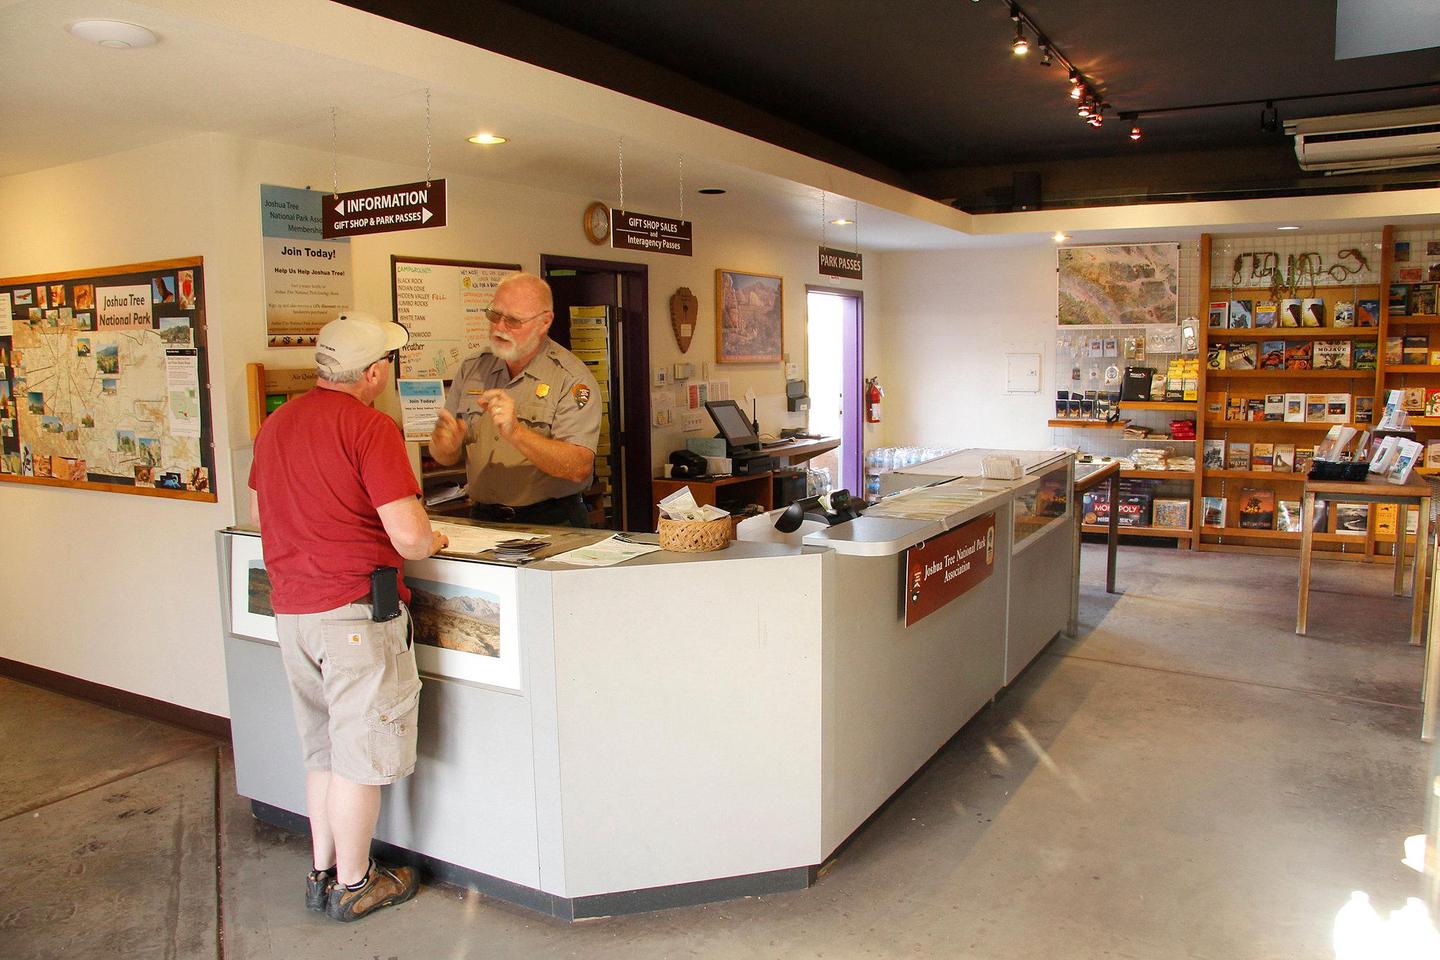 Front Desk at the Joshua Tree Visitor CenterAll park visitor centers have information desks for visitors to get orientation materials and ask questions to park employees.